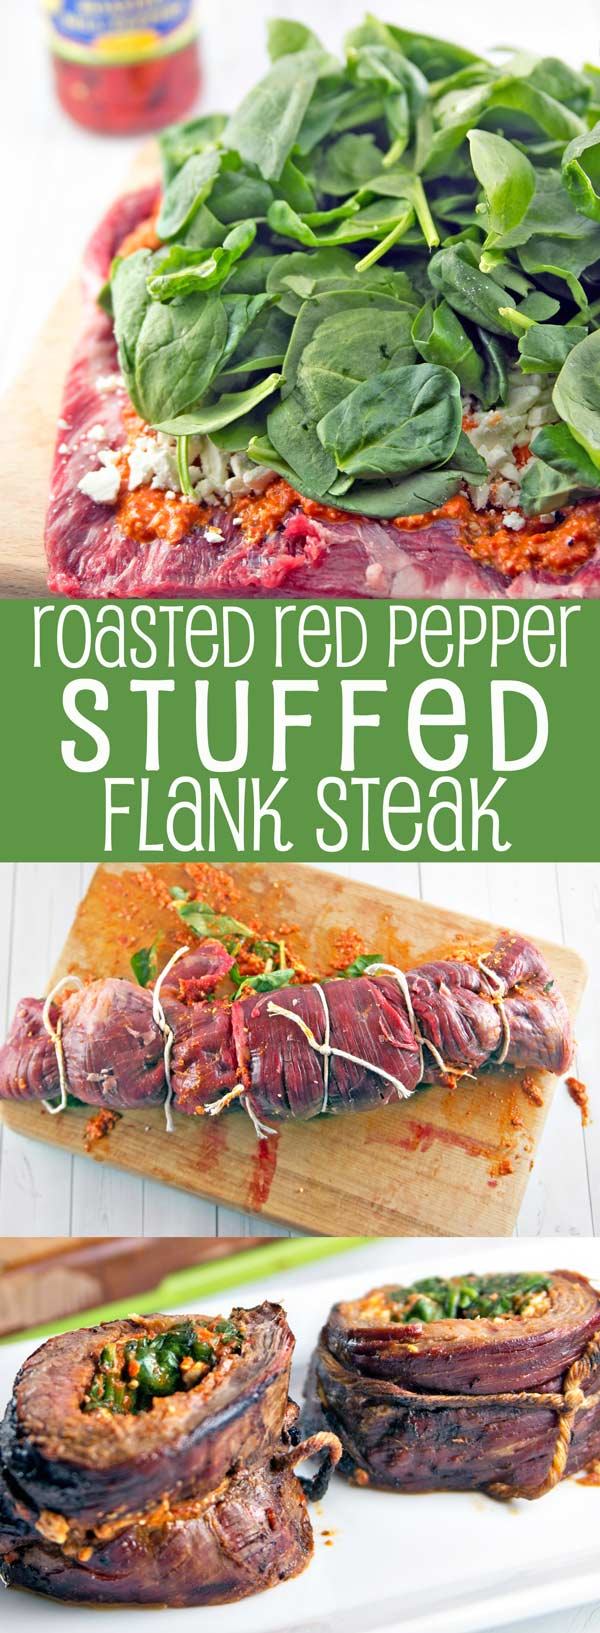 Roasted Red Pepper Stuffed Flank Steak: Stuck in a grilling rut? Shake things up with the bold, bright flavors of a Mediterranean-inspired stuffed flank steak, starring roasted red pepper pesto, feta, and spinach. #ad https://ooh.li/21ca3ca